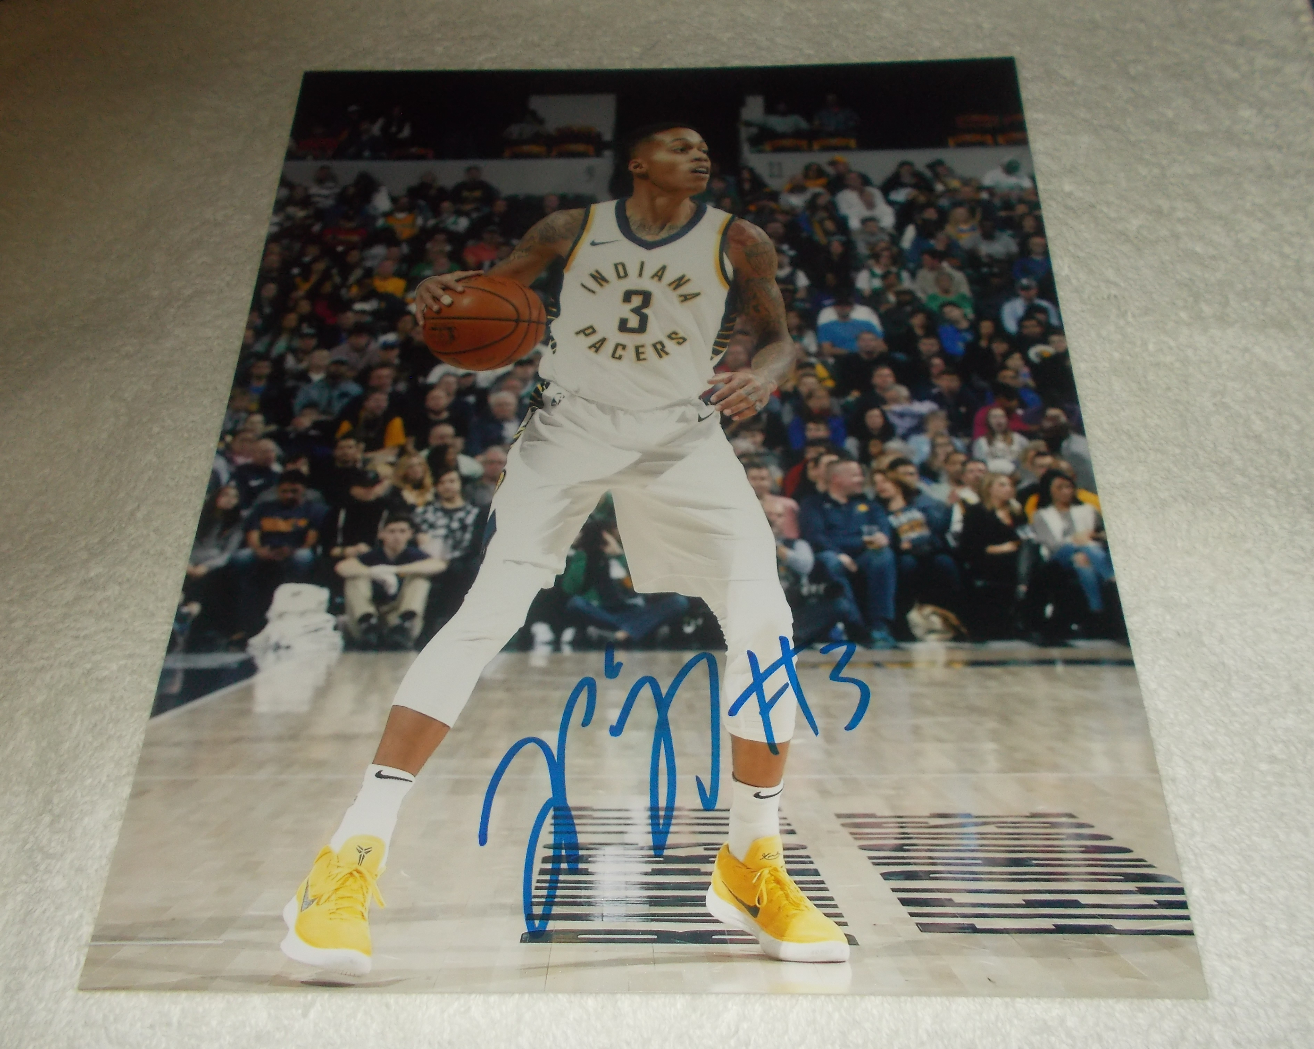 JOSEPH YOUNG Indiana Pacers SIGNED AUTOGRAPHED 8x10 Photo Poster painting COA Basketball Oregon